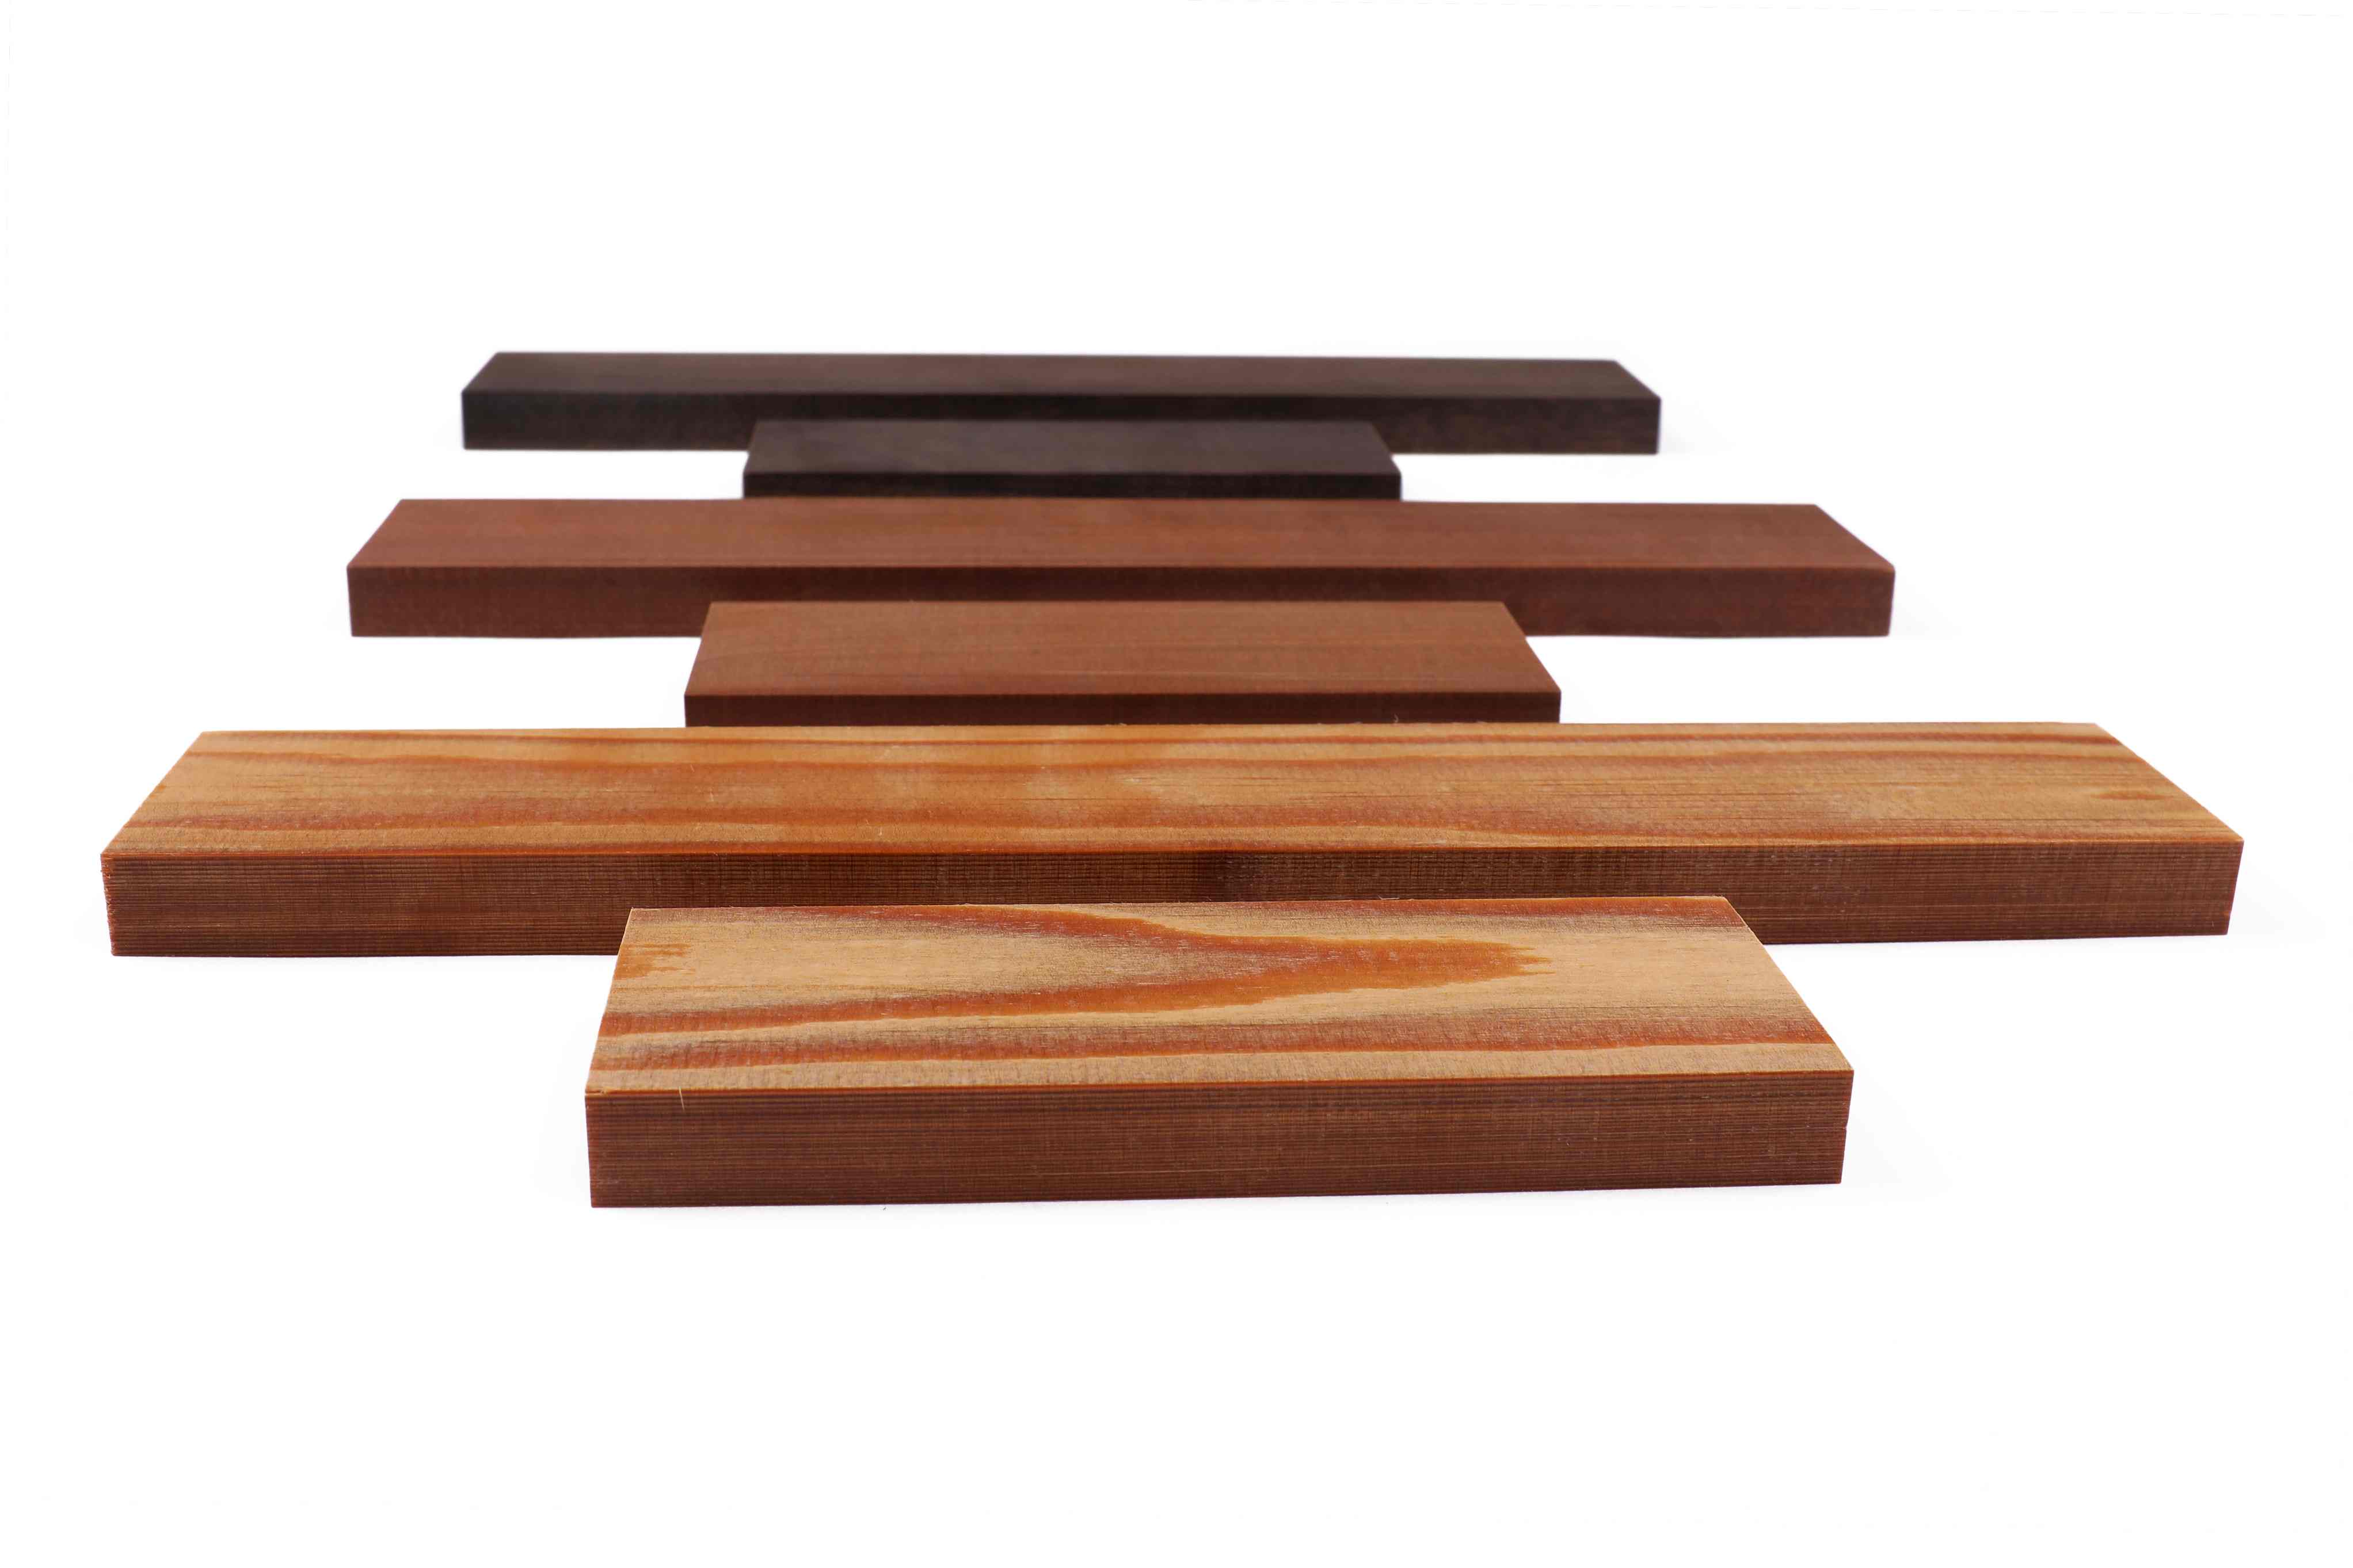 Sonowood square timbers for fingerboard and tailpiece. Front: spruce, center: maple, back: walnut